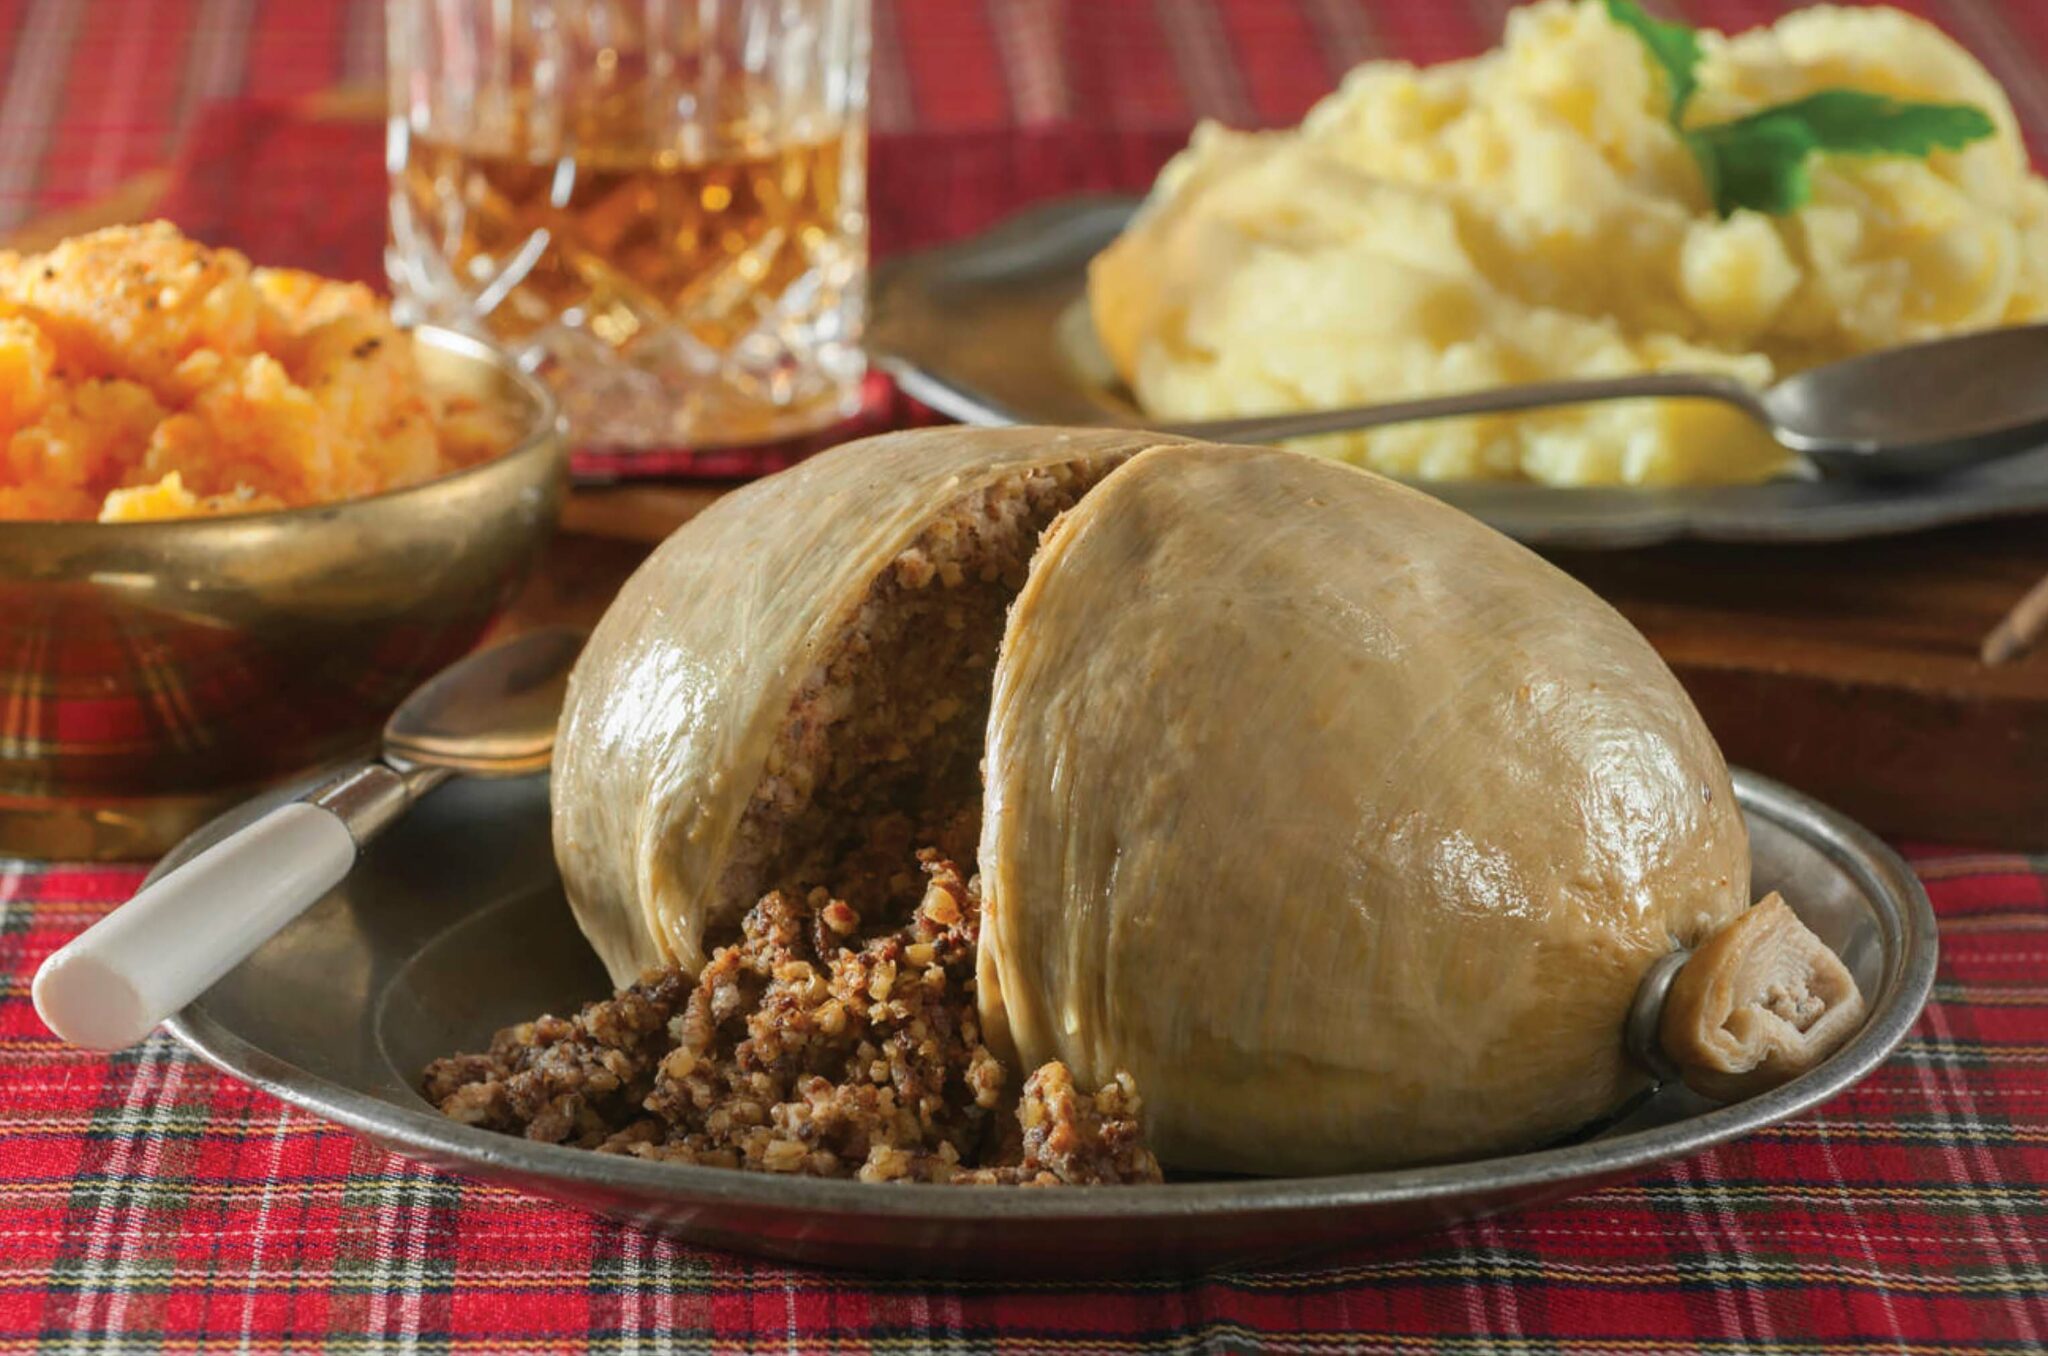 Haggis is served at Academia Lodge No. 847 in Oakland, California